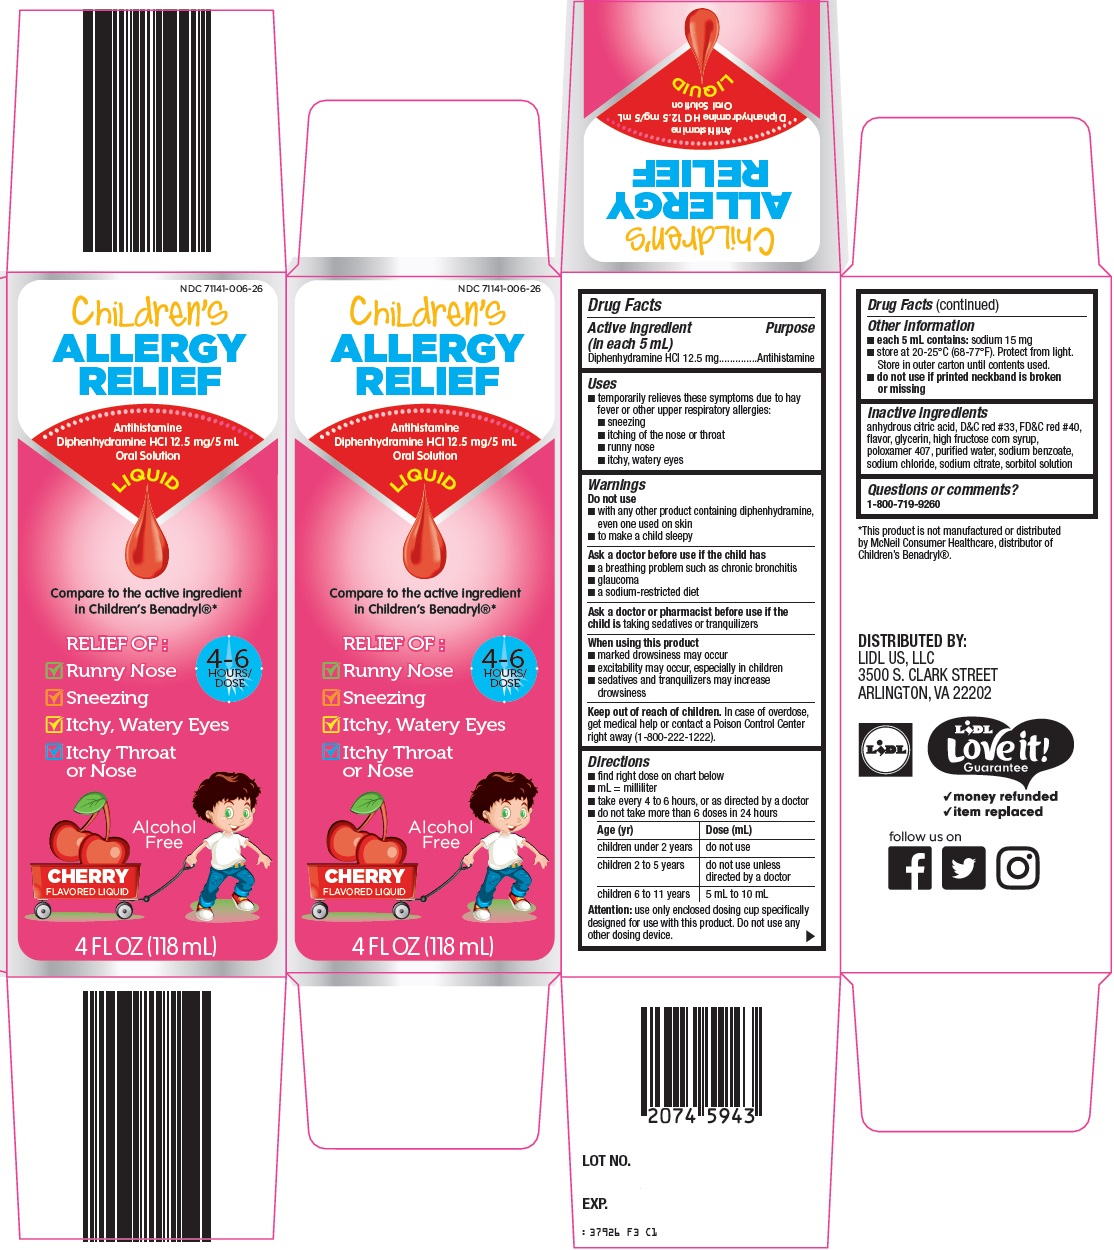 Childrens Allergy Relief | Diphenhydramine Hcl Solution while Breastfeeding